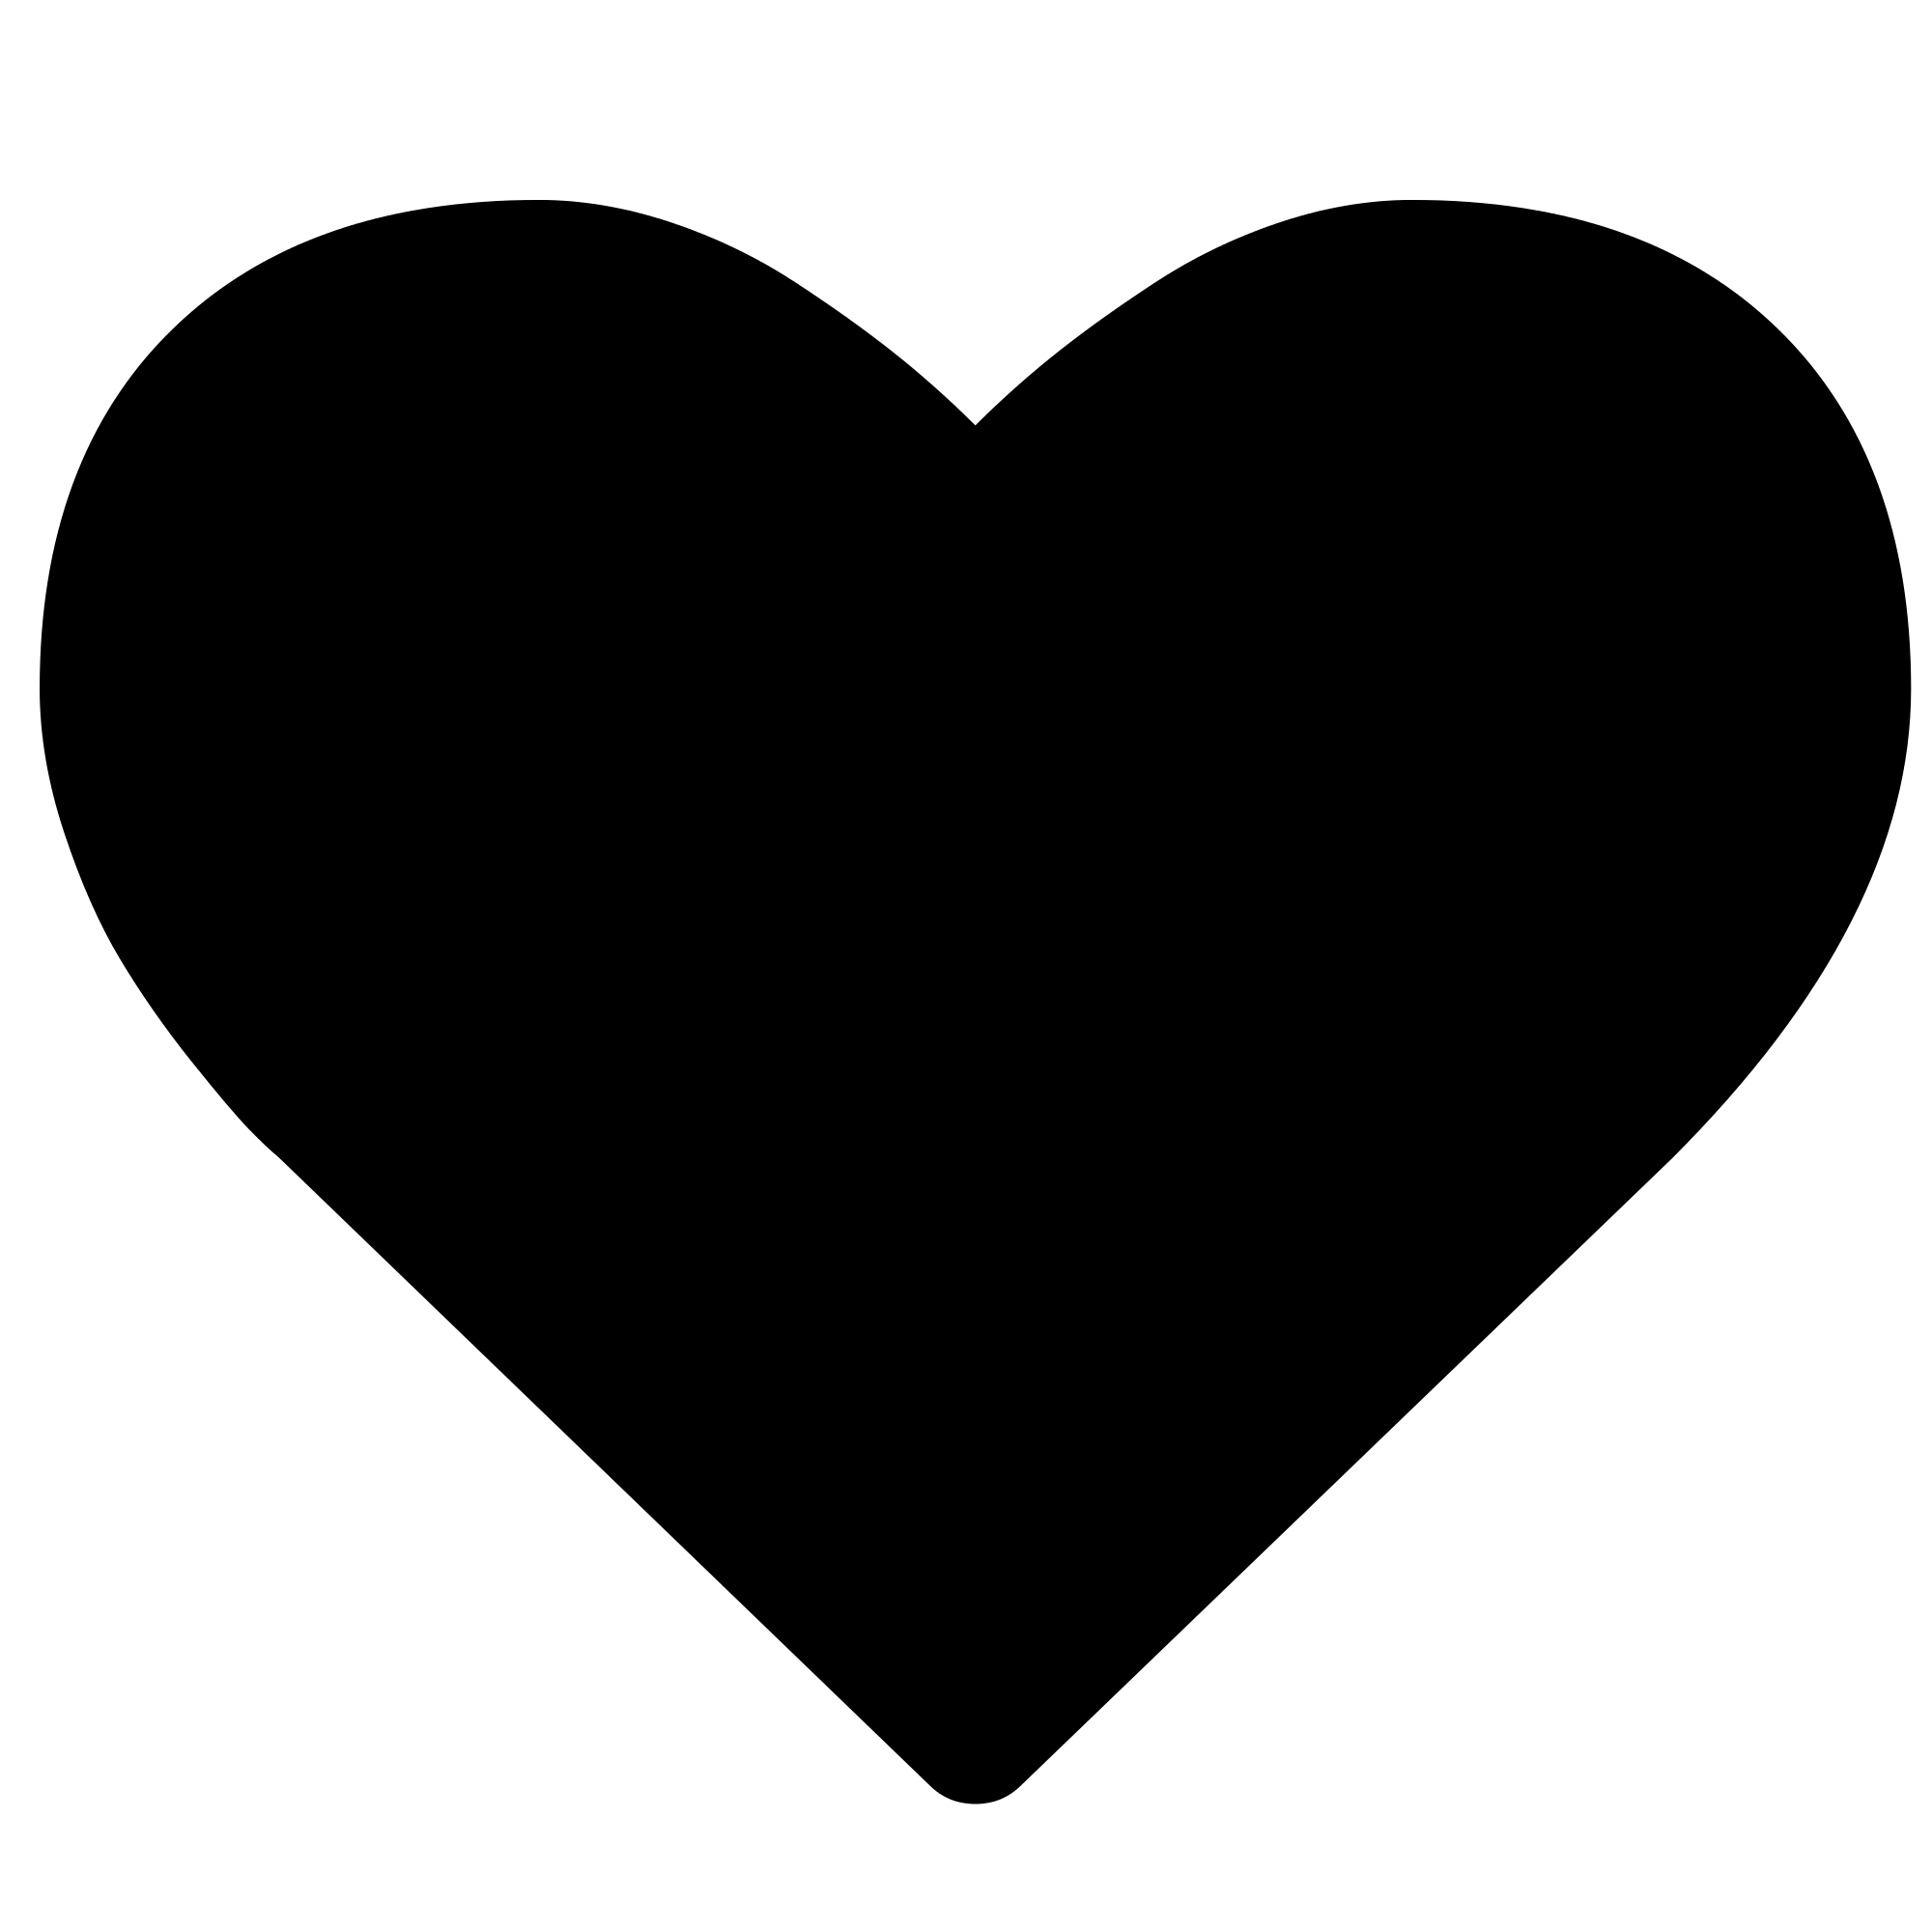 Heart Black and White Logo - File:Heart font awesome.svg - Wikimedia Commons